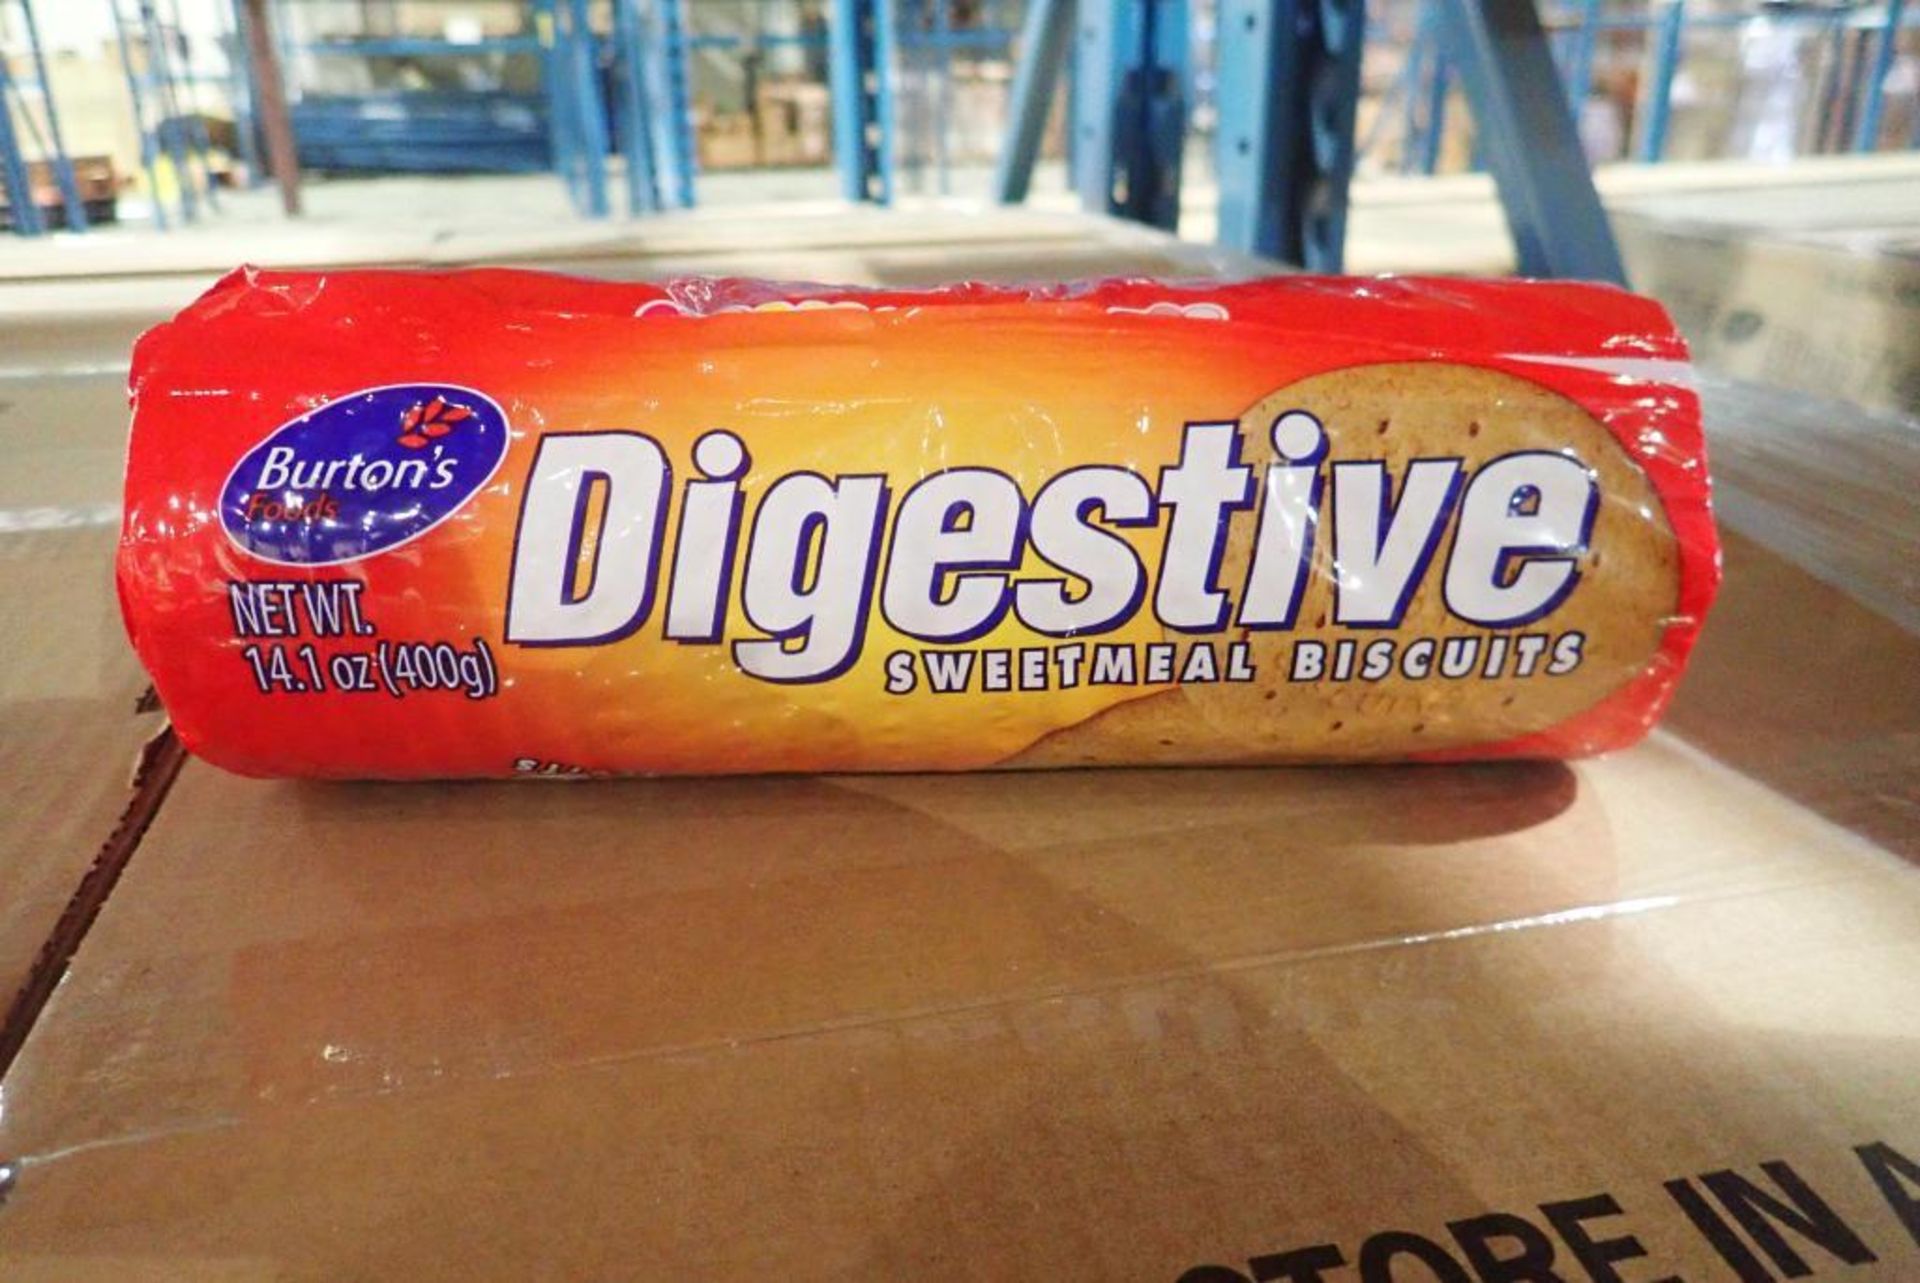 Lot of Approx. (50) Cases Burtons Digestive Sweetmeal Biscuits. - Image 2 of 2